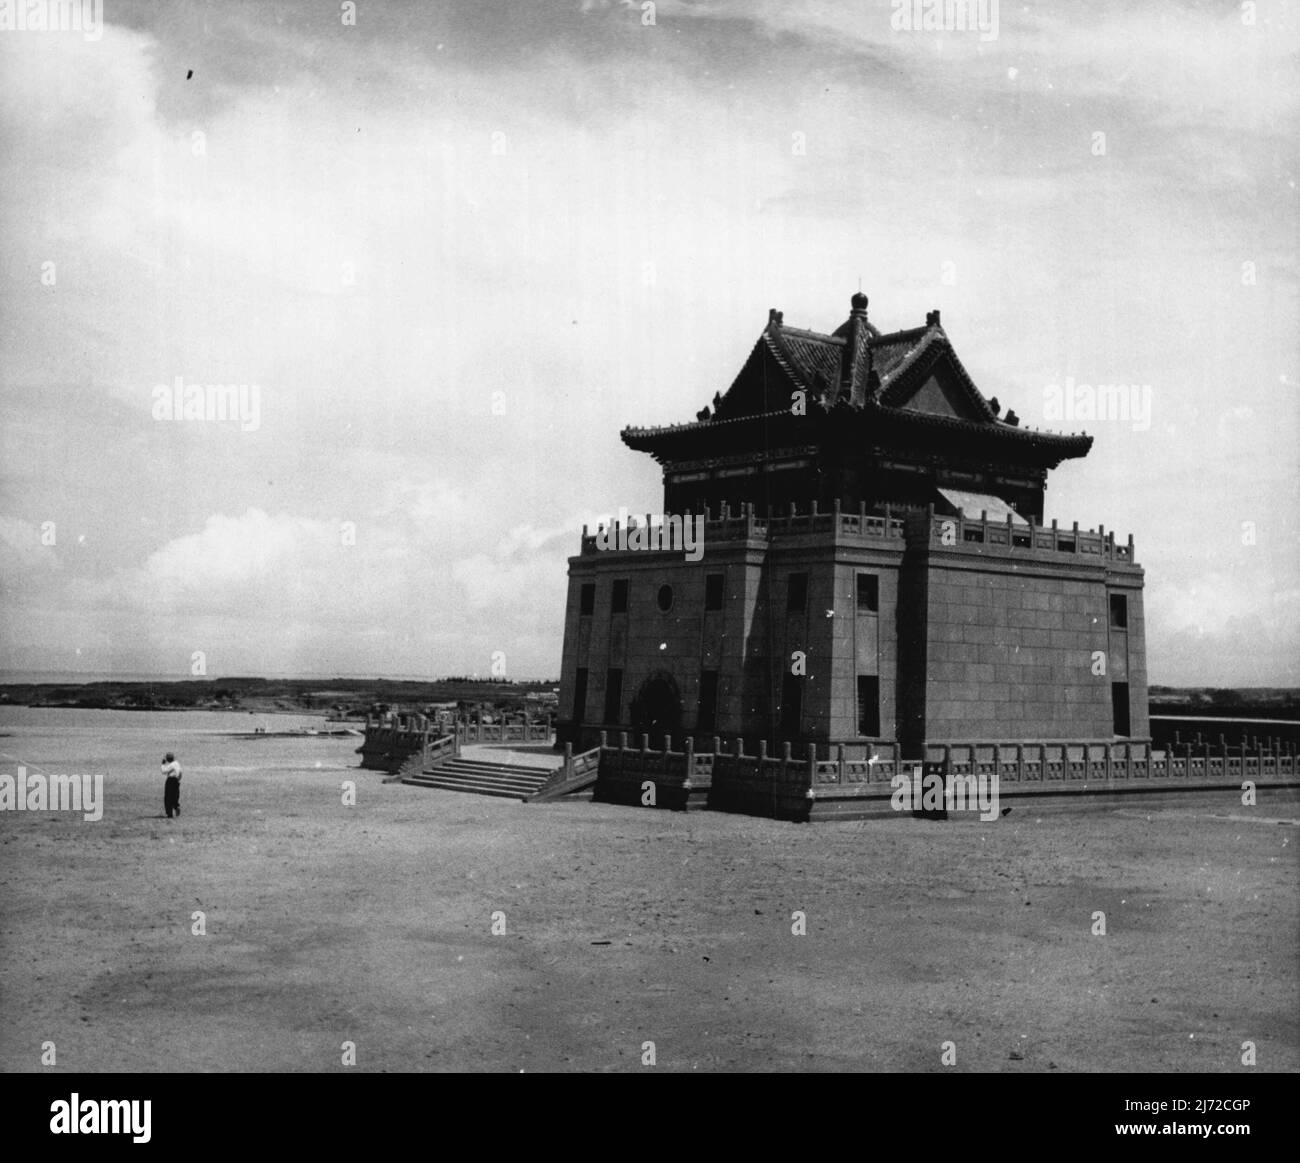 Show Window Of Free China (Third Of Six) -- Symbolic of free China is this Pagoda Memorial to Dr. Sun Yat-Sen, Founder of the Chinese Republic. Built by Nationalist soldiers on Kinmen, the monument faces the Mainland and stands as a promise of freedom. July 16, 1954. (Photo by United Press). Stock Photo